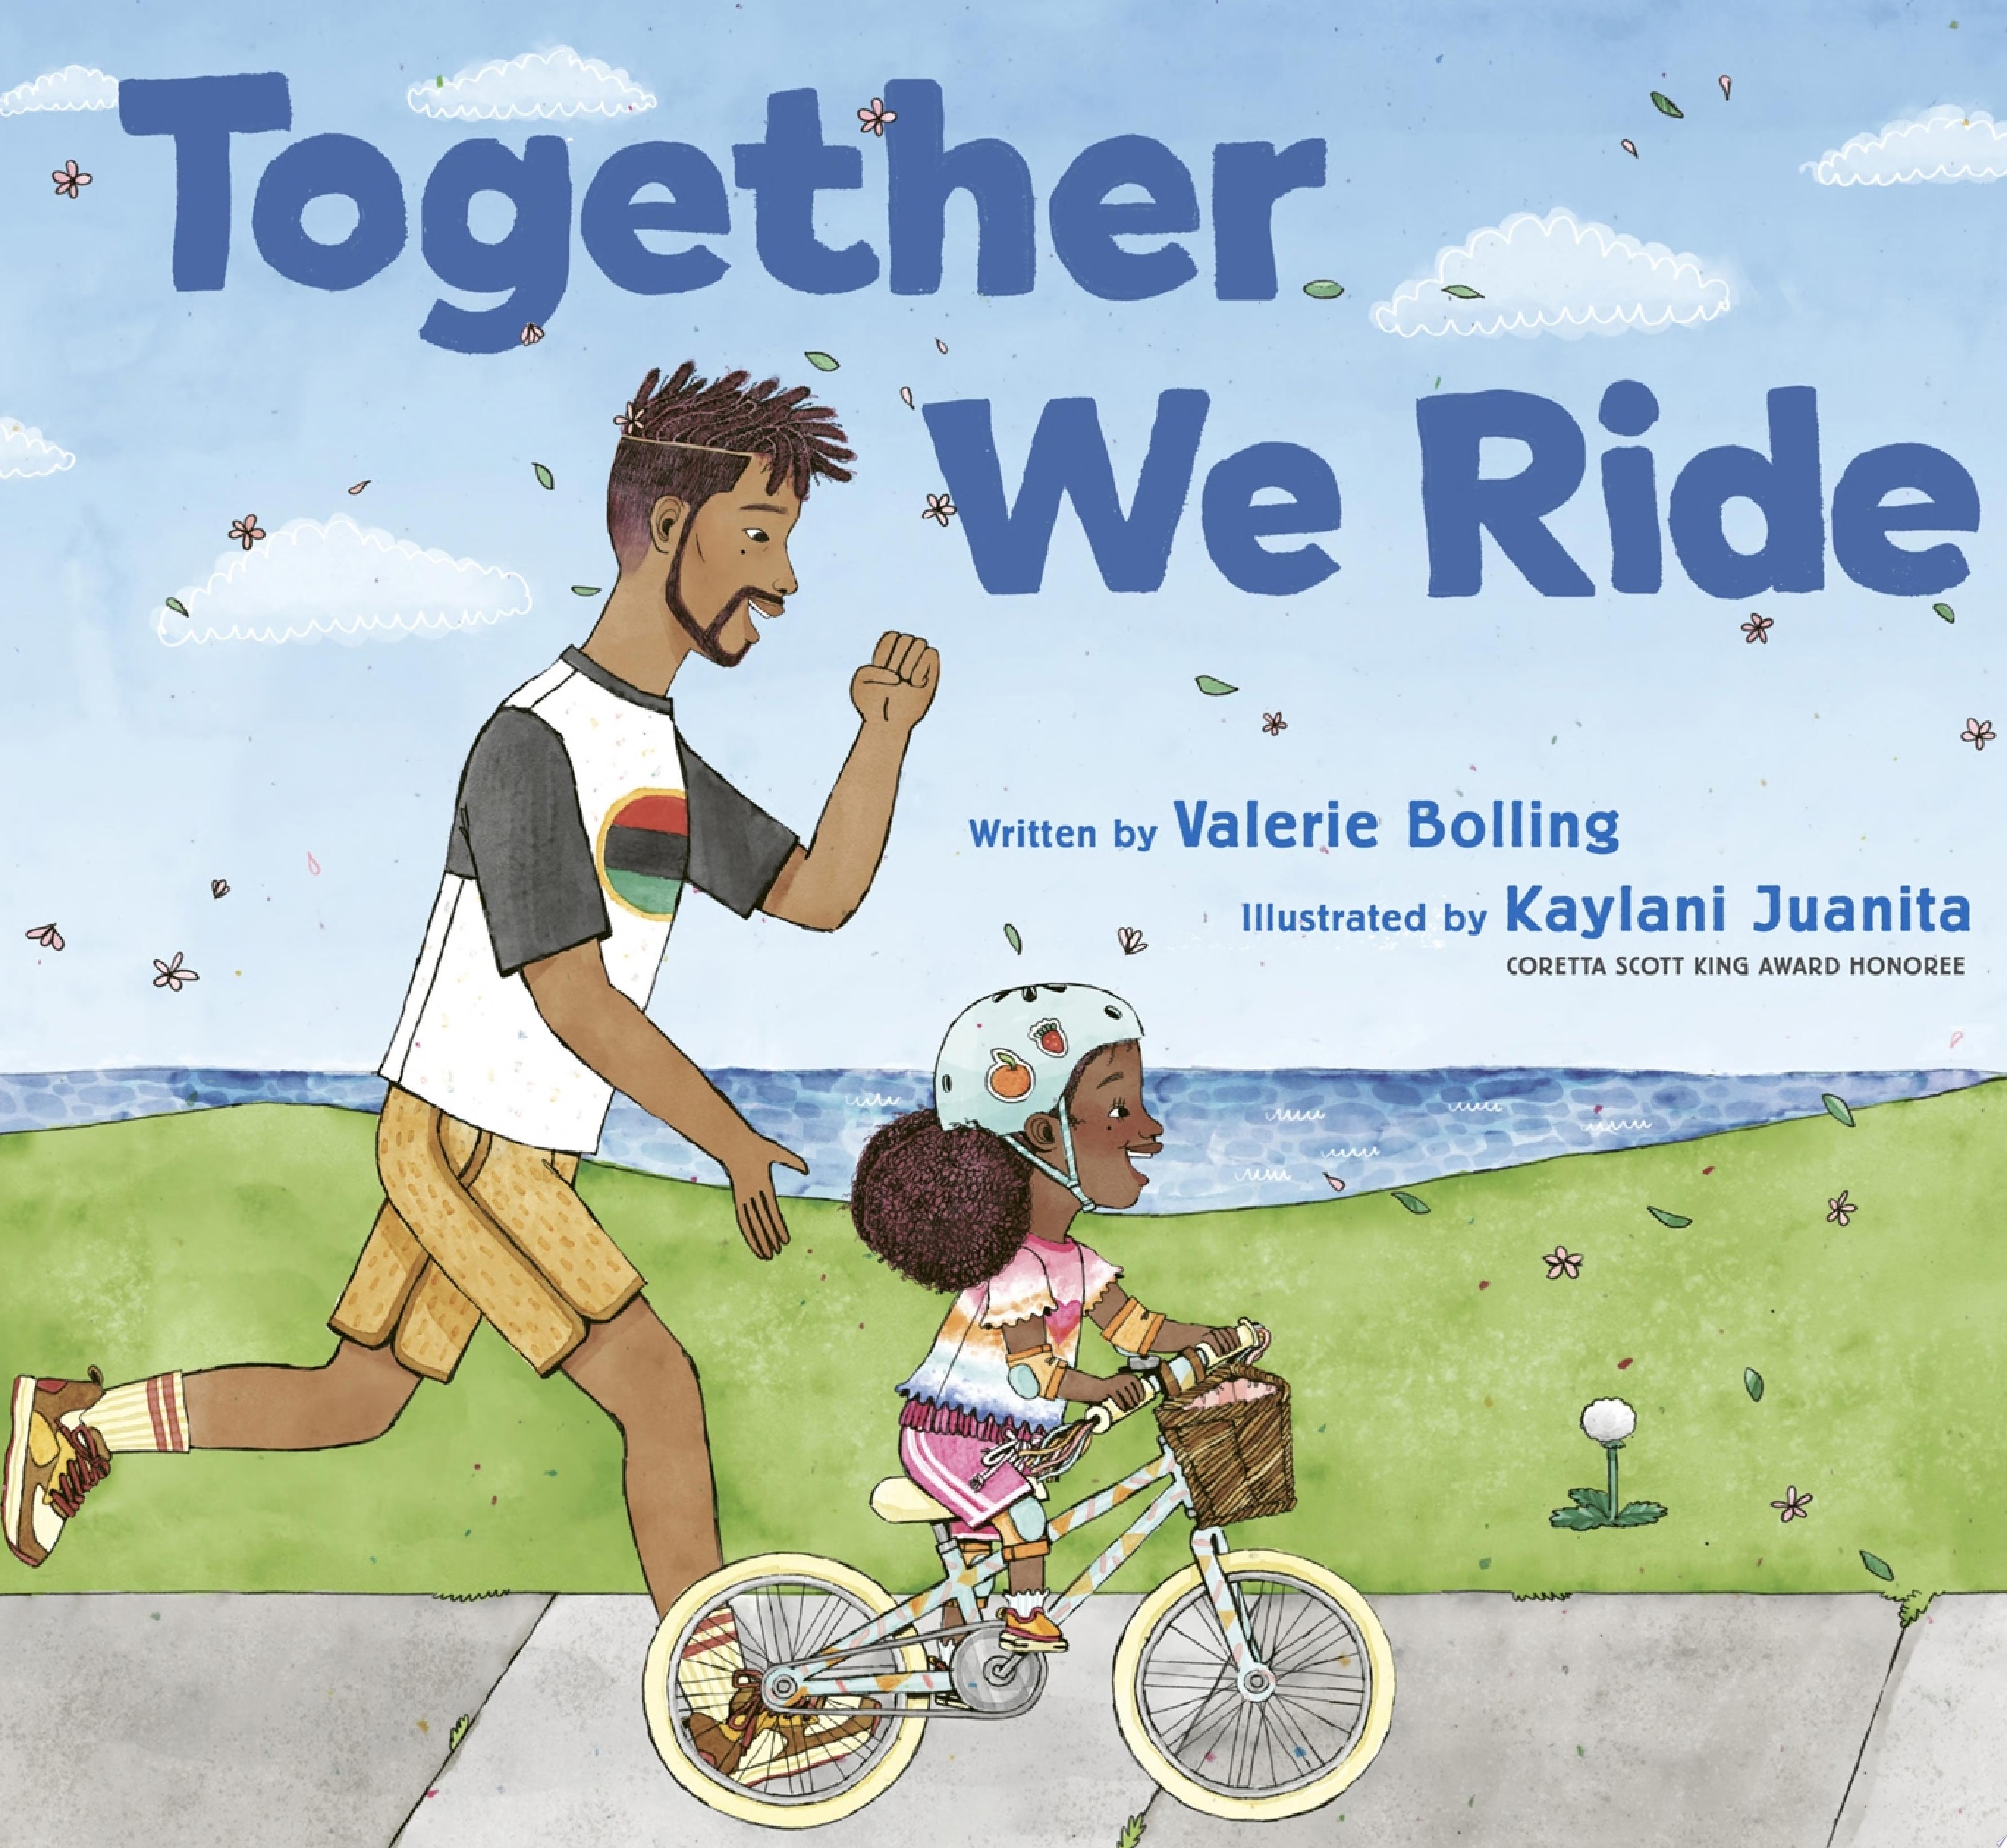 Image for "Together We Ride"